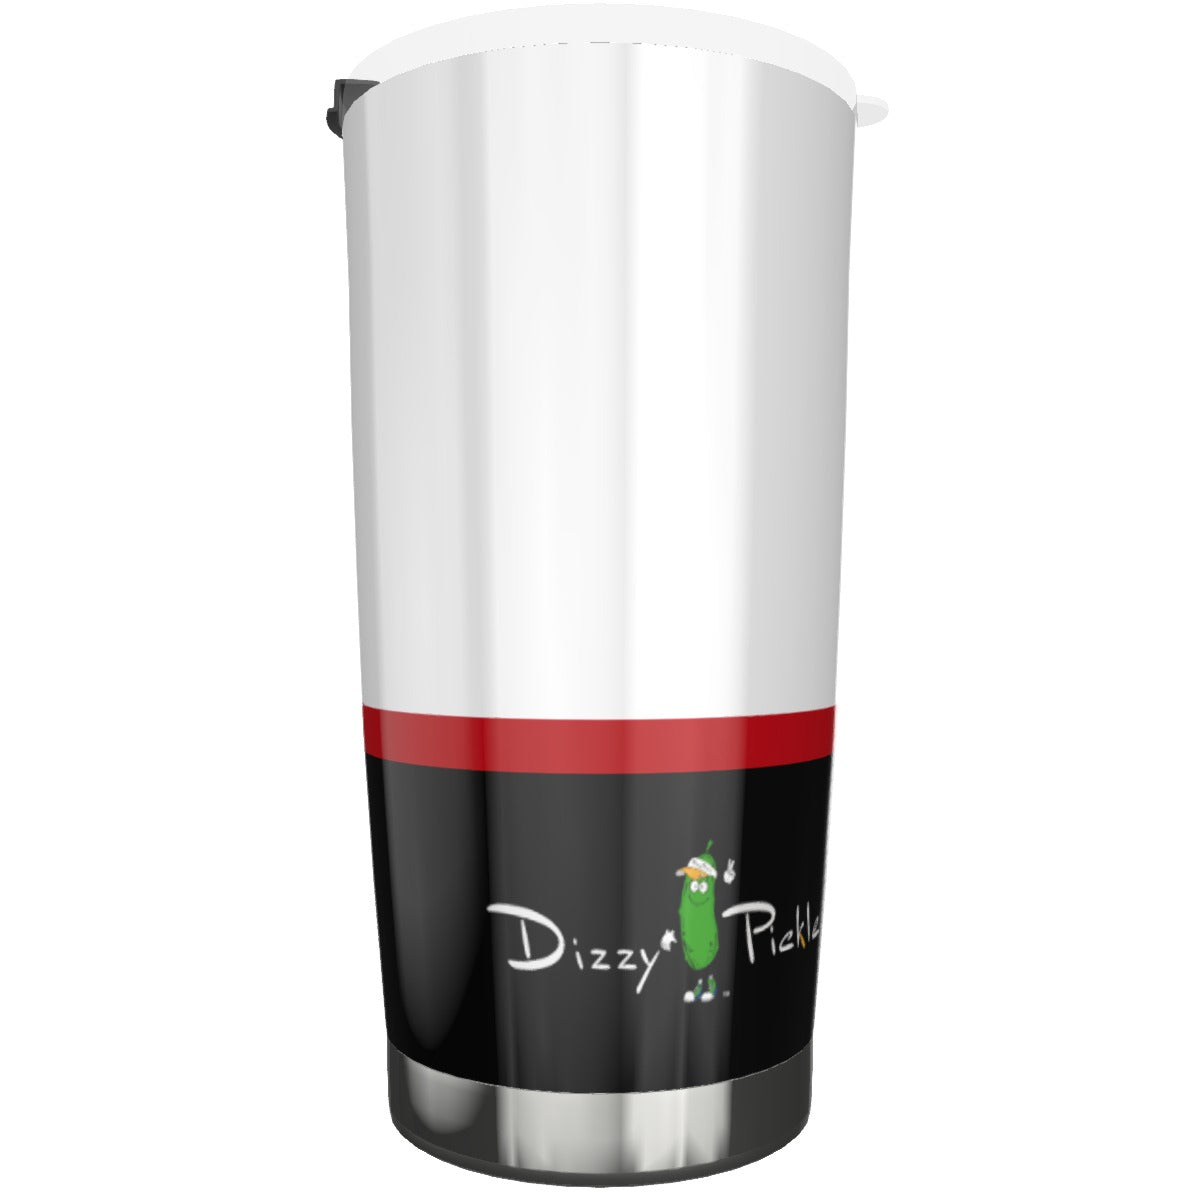 Dizzy Pickle Love at First Serve Red/Black Tumbler 20oz with Lid